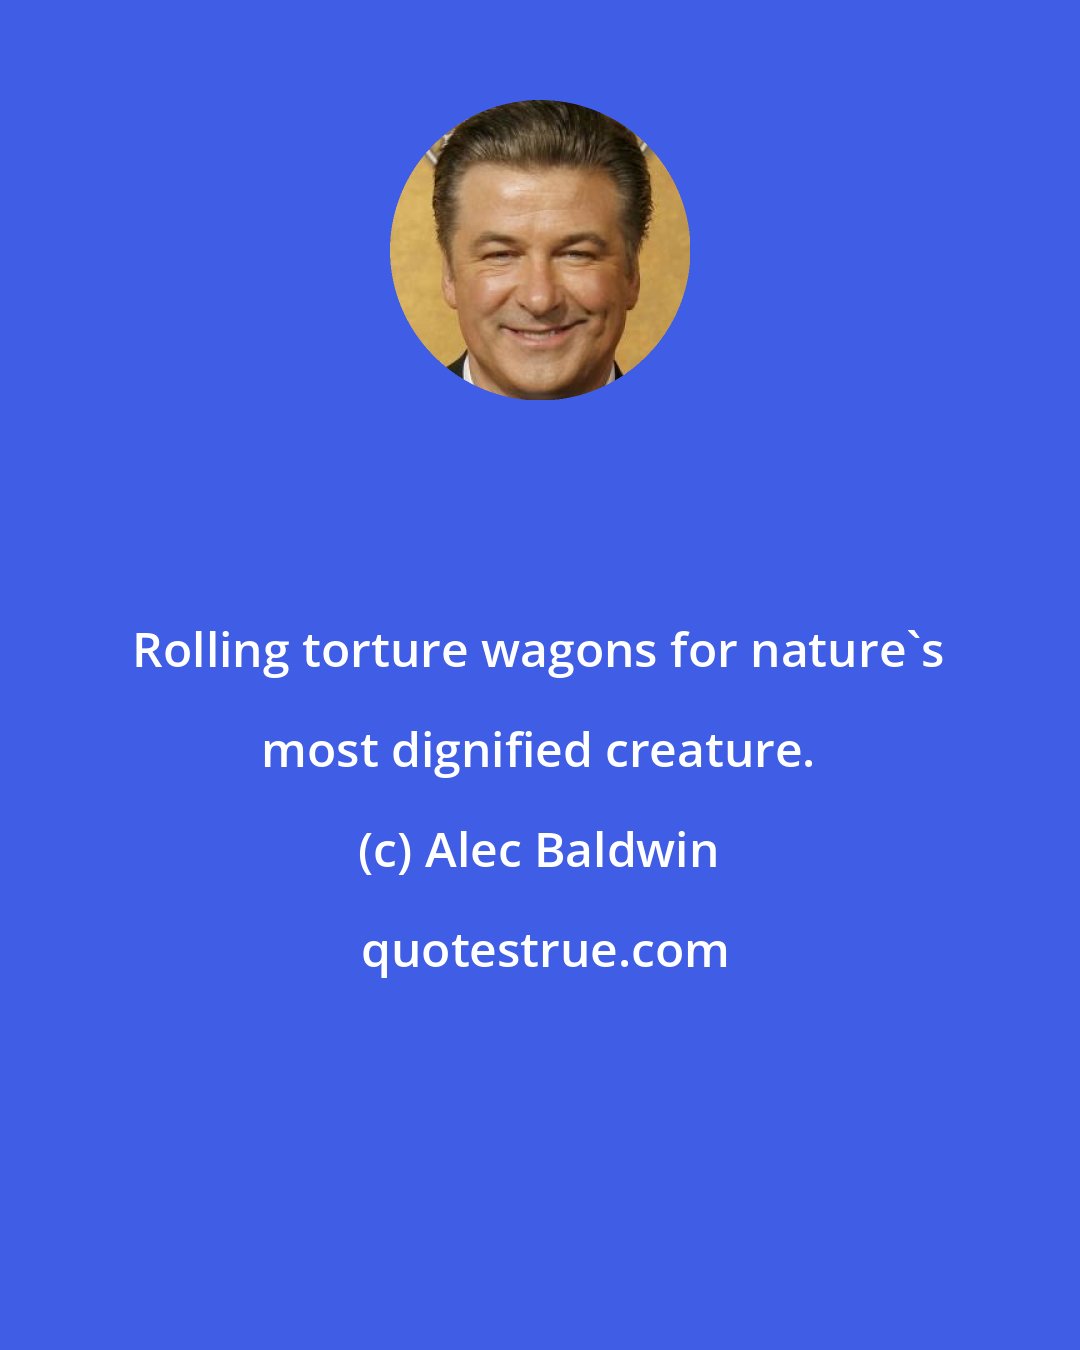 Alec Baldwin: Rolling torture wagons for nature's most dignified creature.